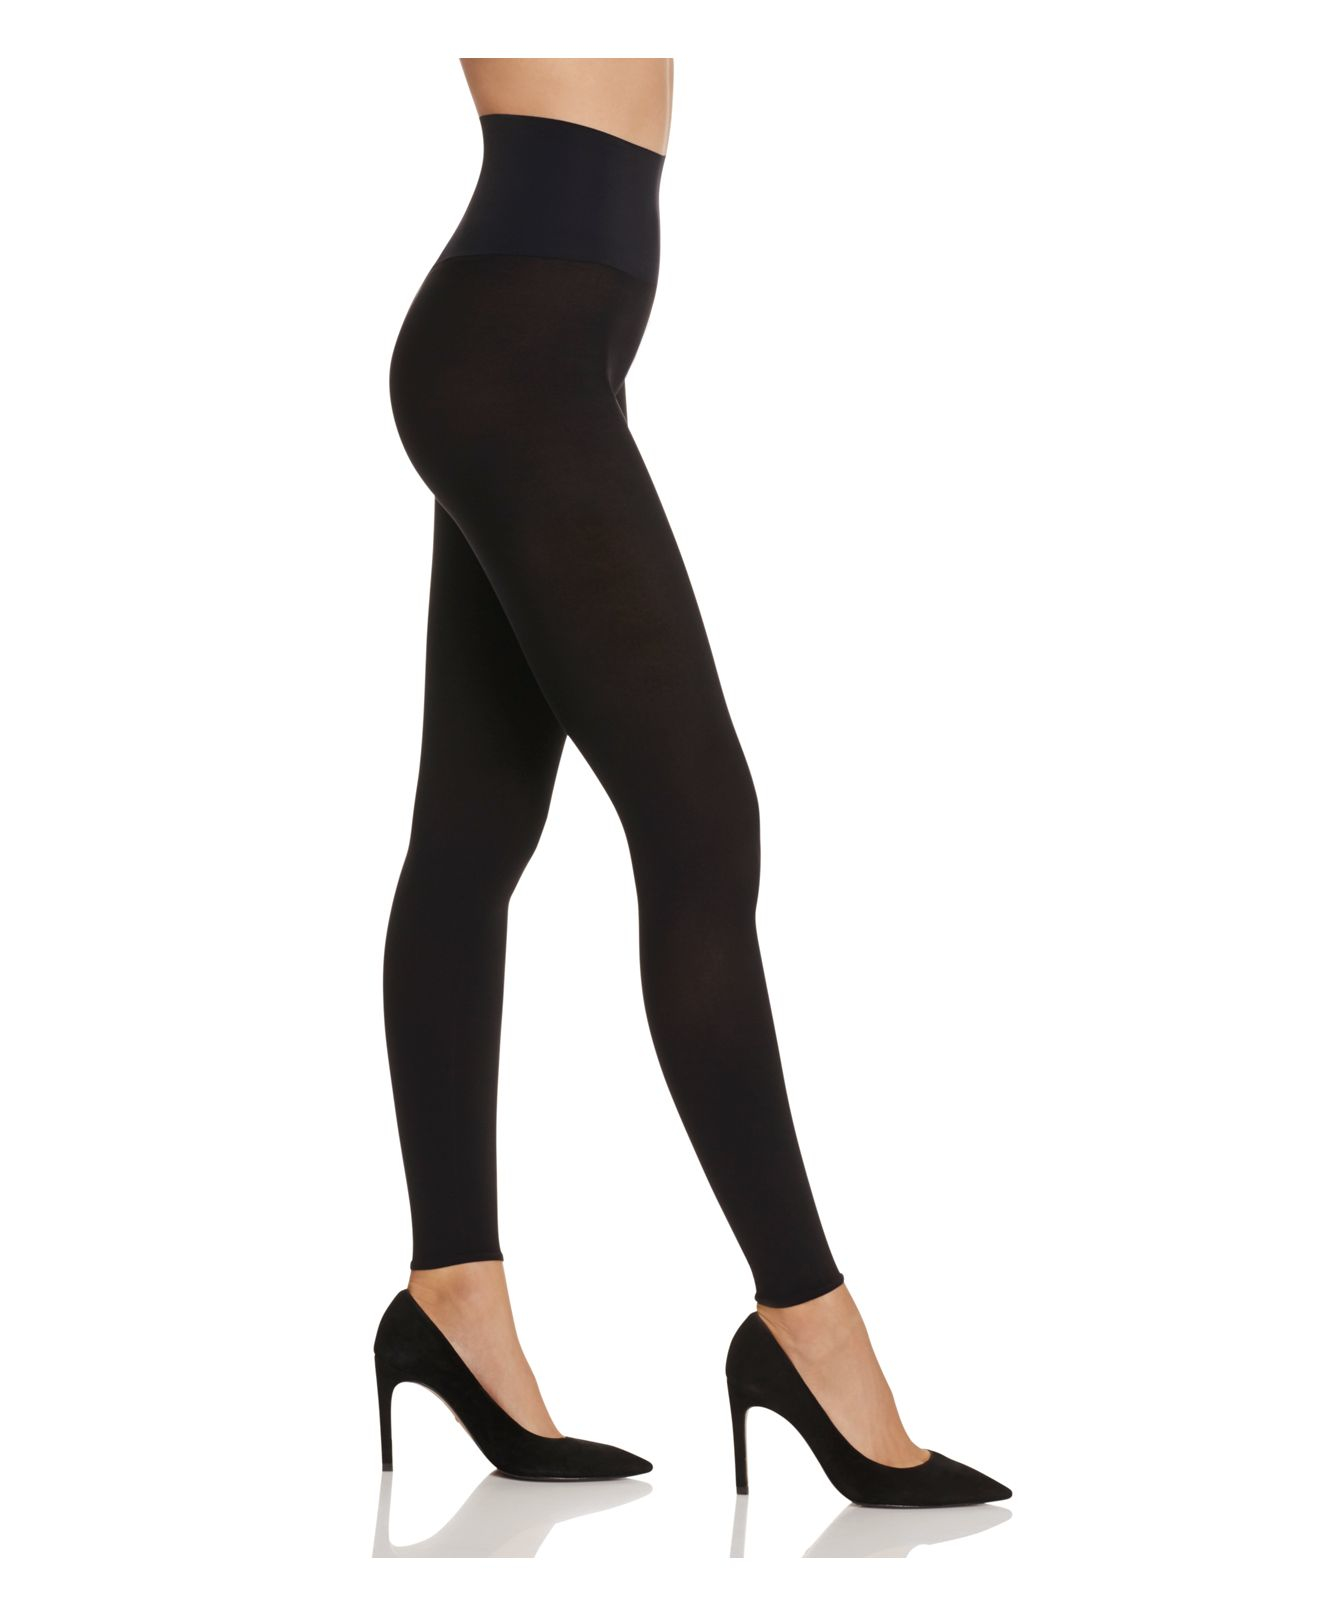 Commando Opaque Footless Tights in Black | Lyst